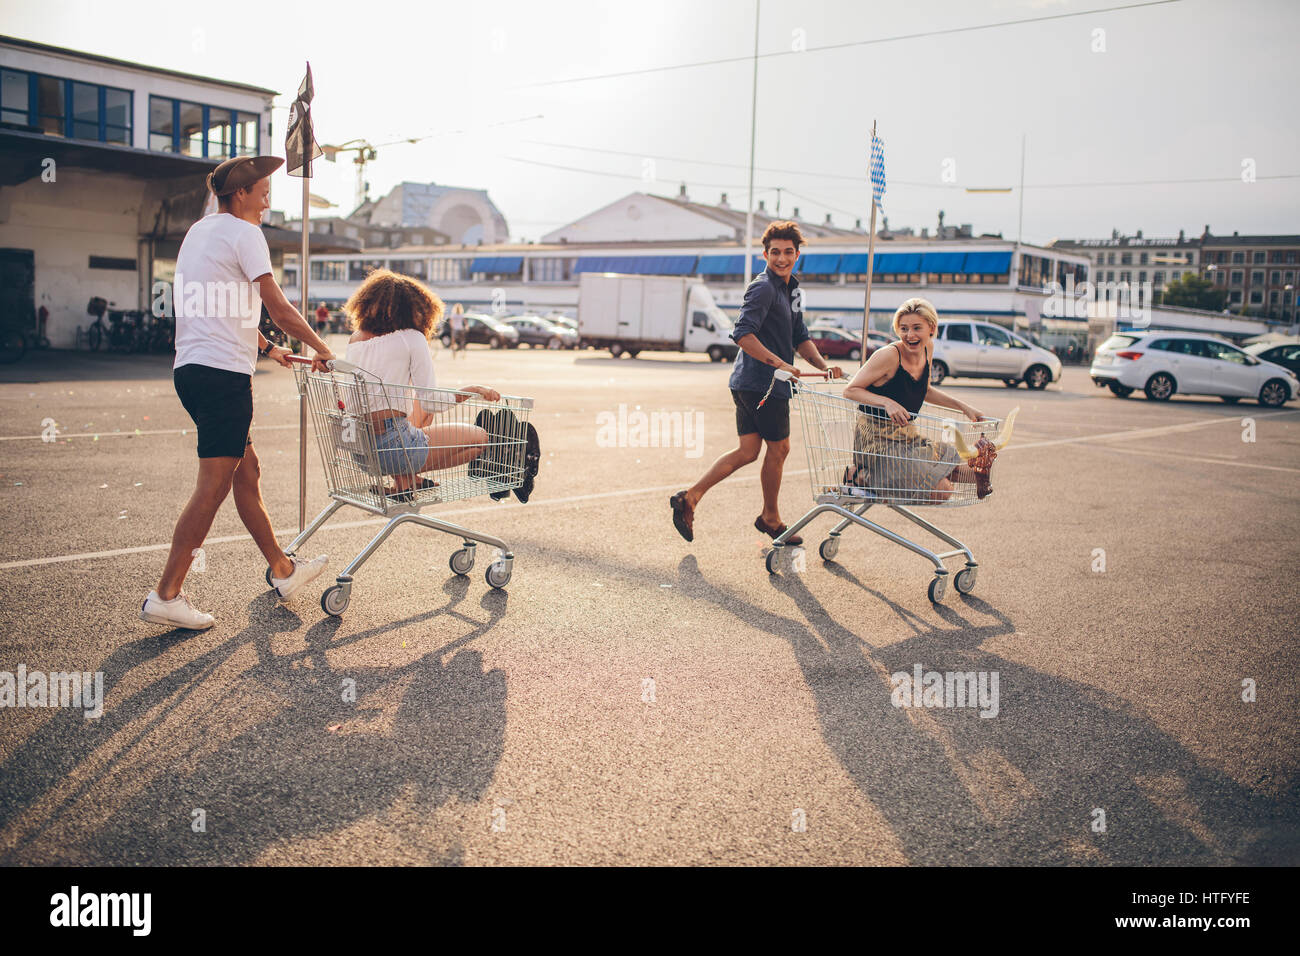 Young friends having fun on a shopping carts. Multiethnic young people playing with shopping cart. Stock Photo